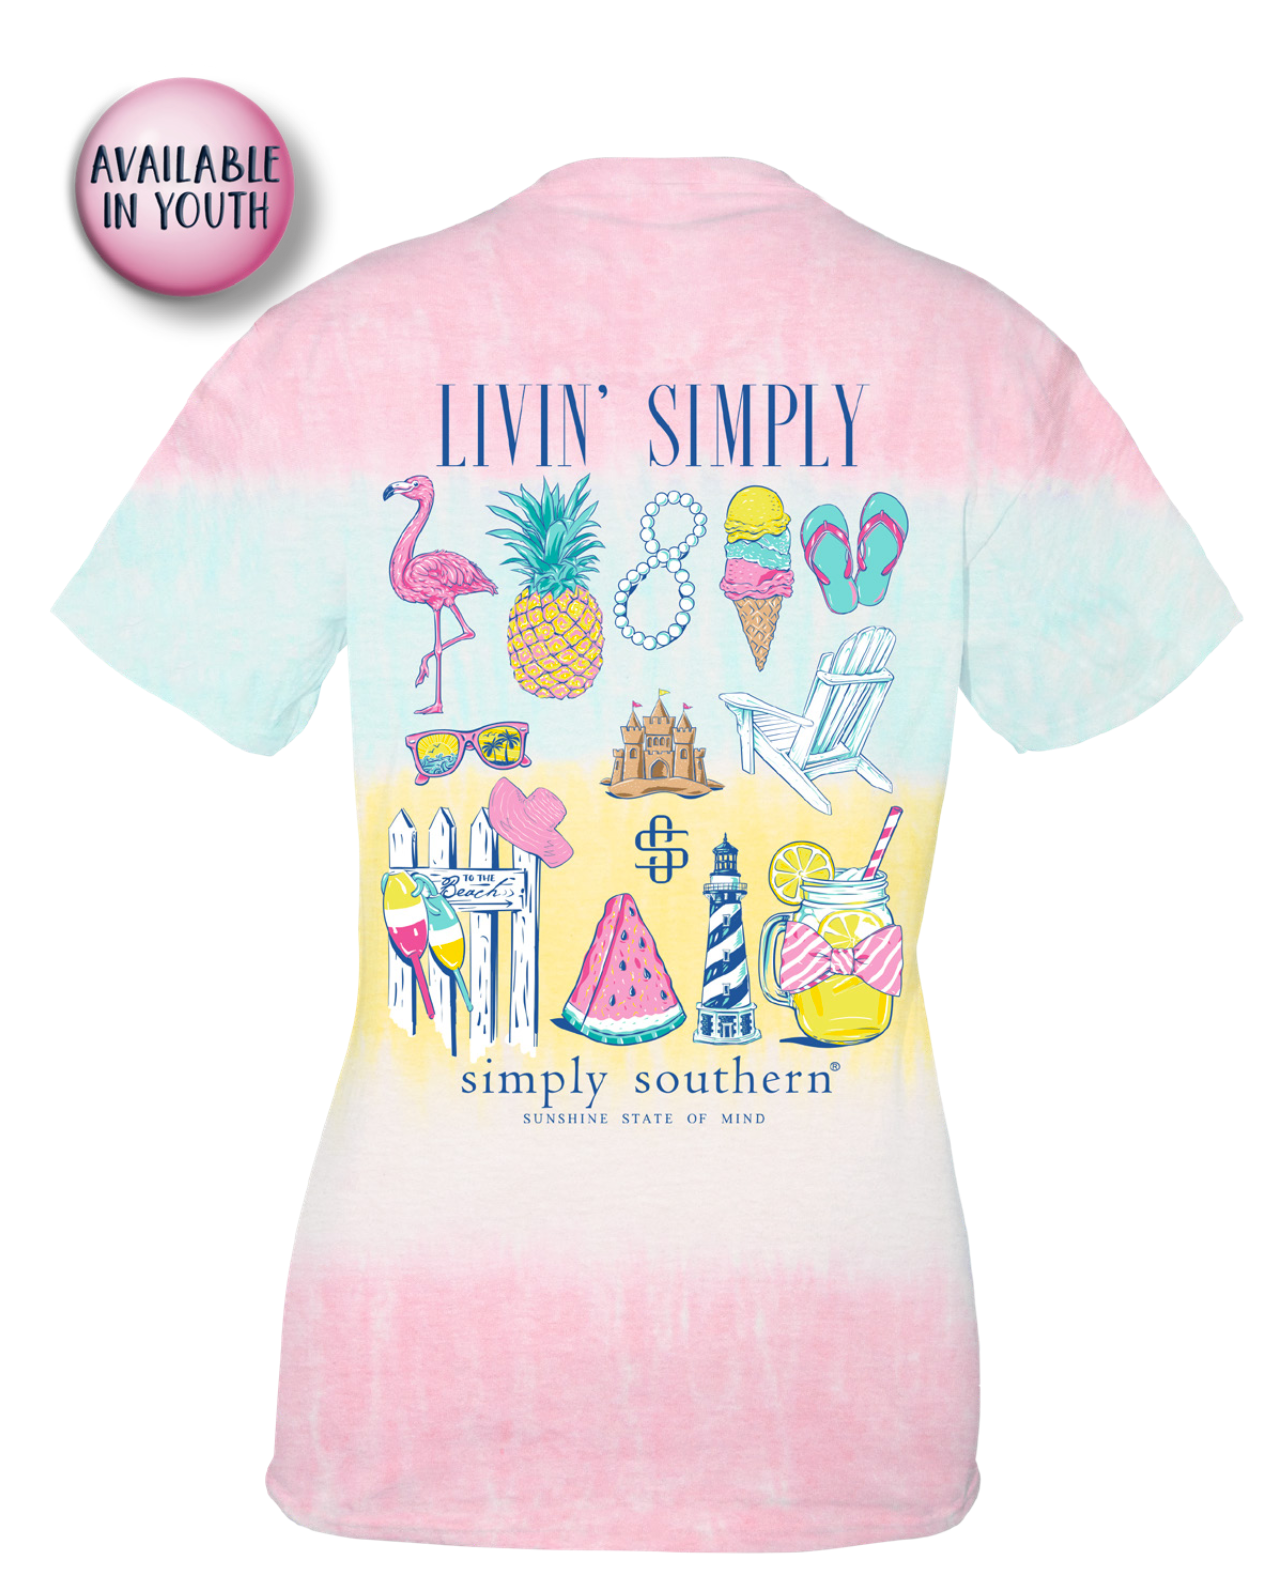 'Livin' Simply' Preppy Icons Short Sleeve Tie Dye Tee by Simply Southern